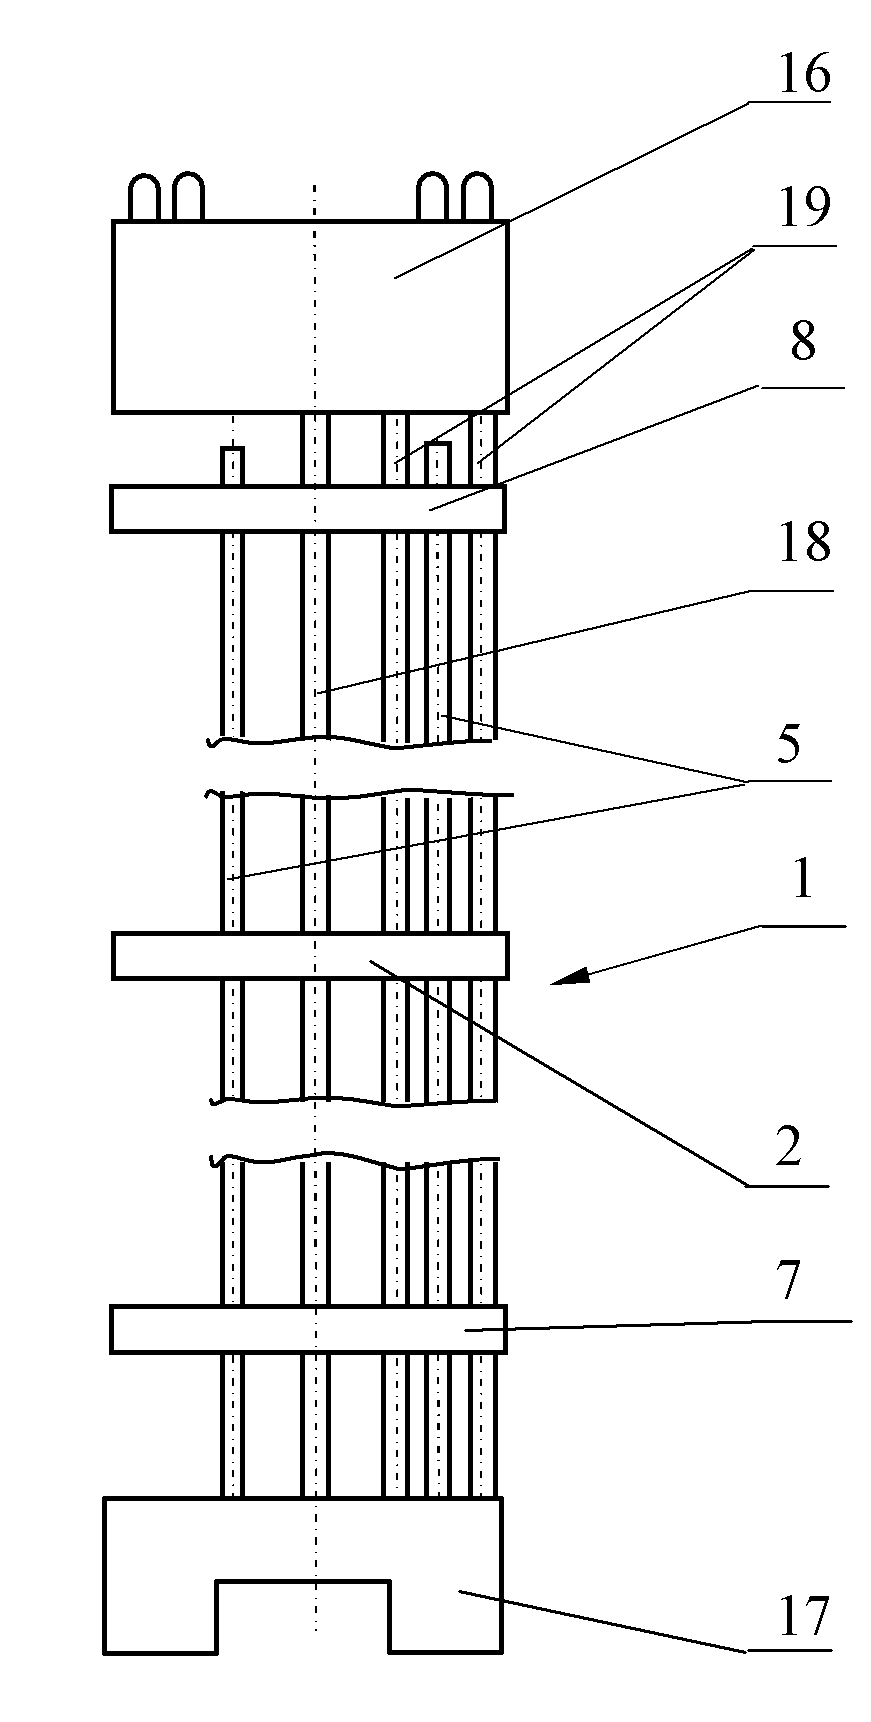 Fuel assembly and plug-in distance element